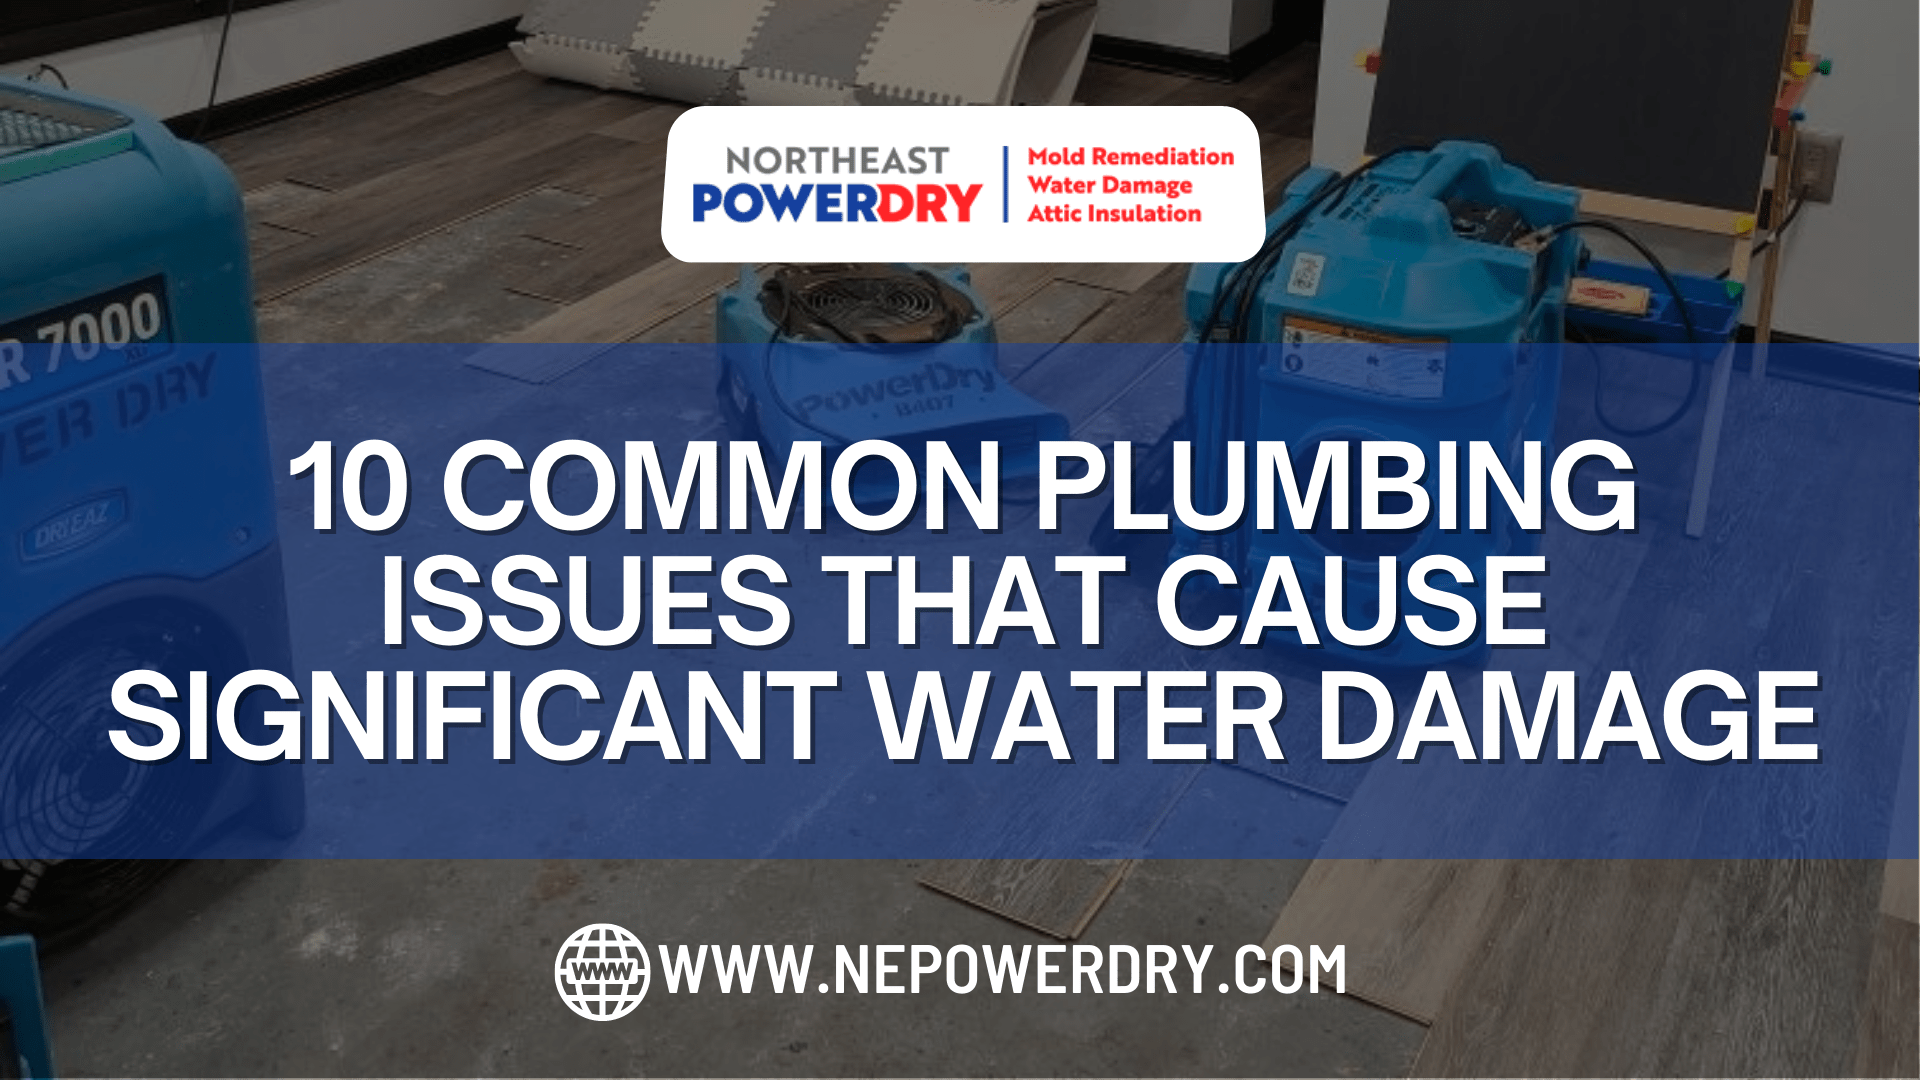 10 Common Plumbing Issues That Cause Significant Water Damage